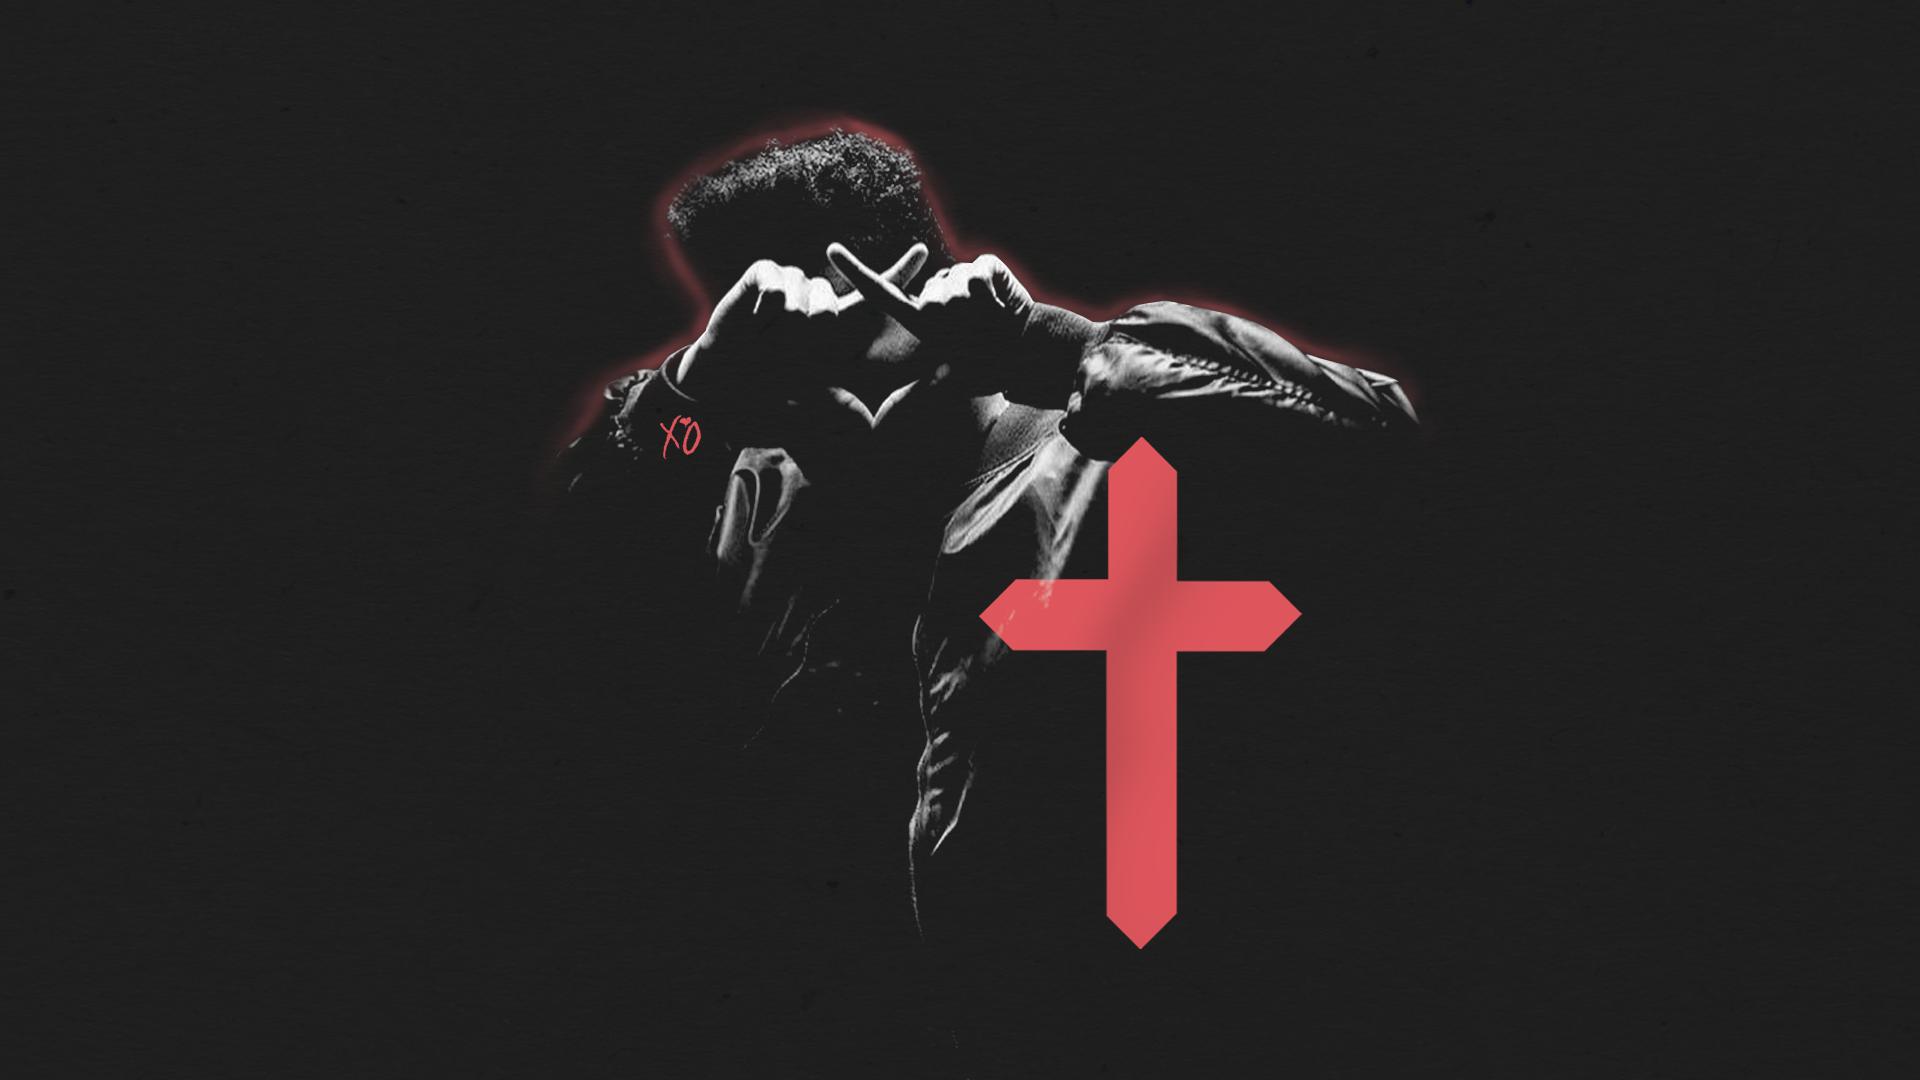 HD wallpaper The Weeknd XO After Hours Album minimalism material  minimal  Wallpaper Flare